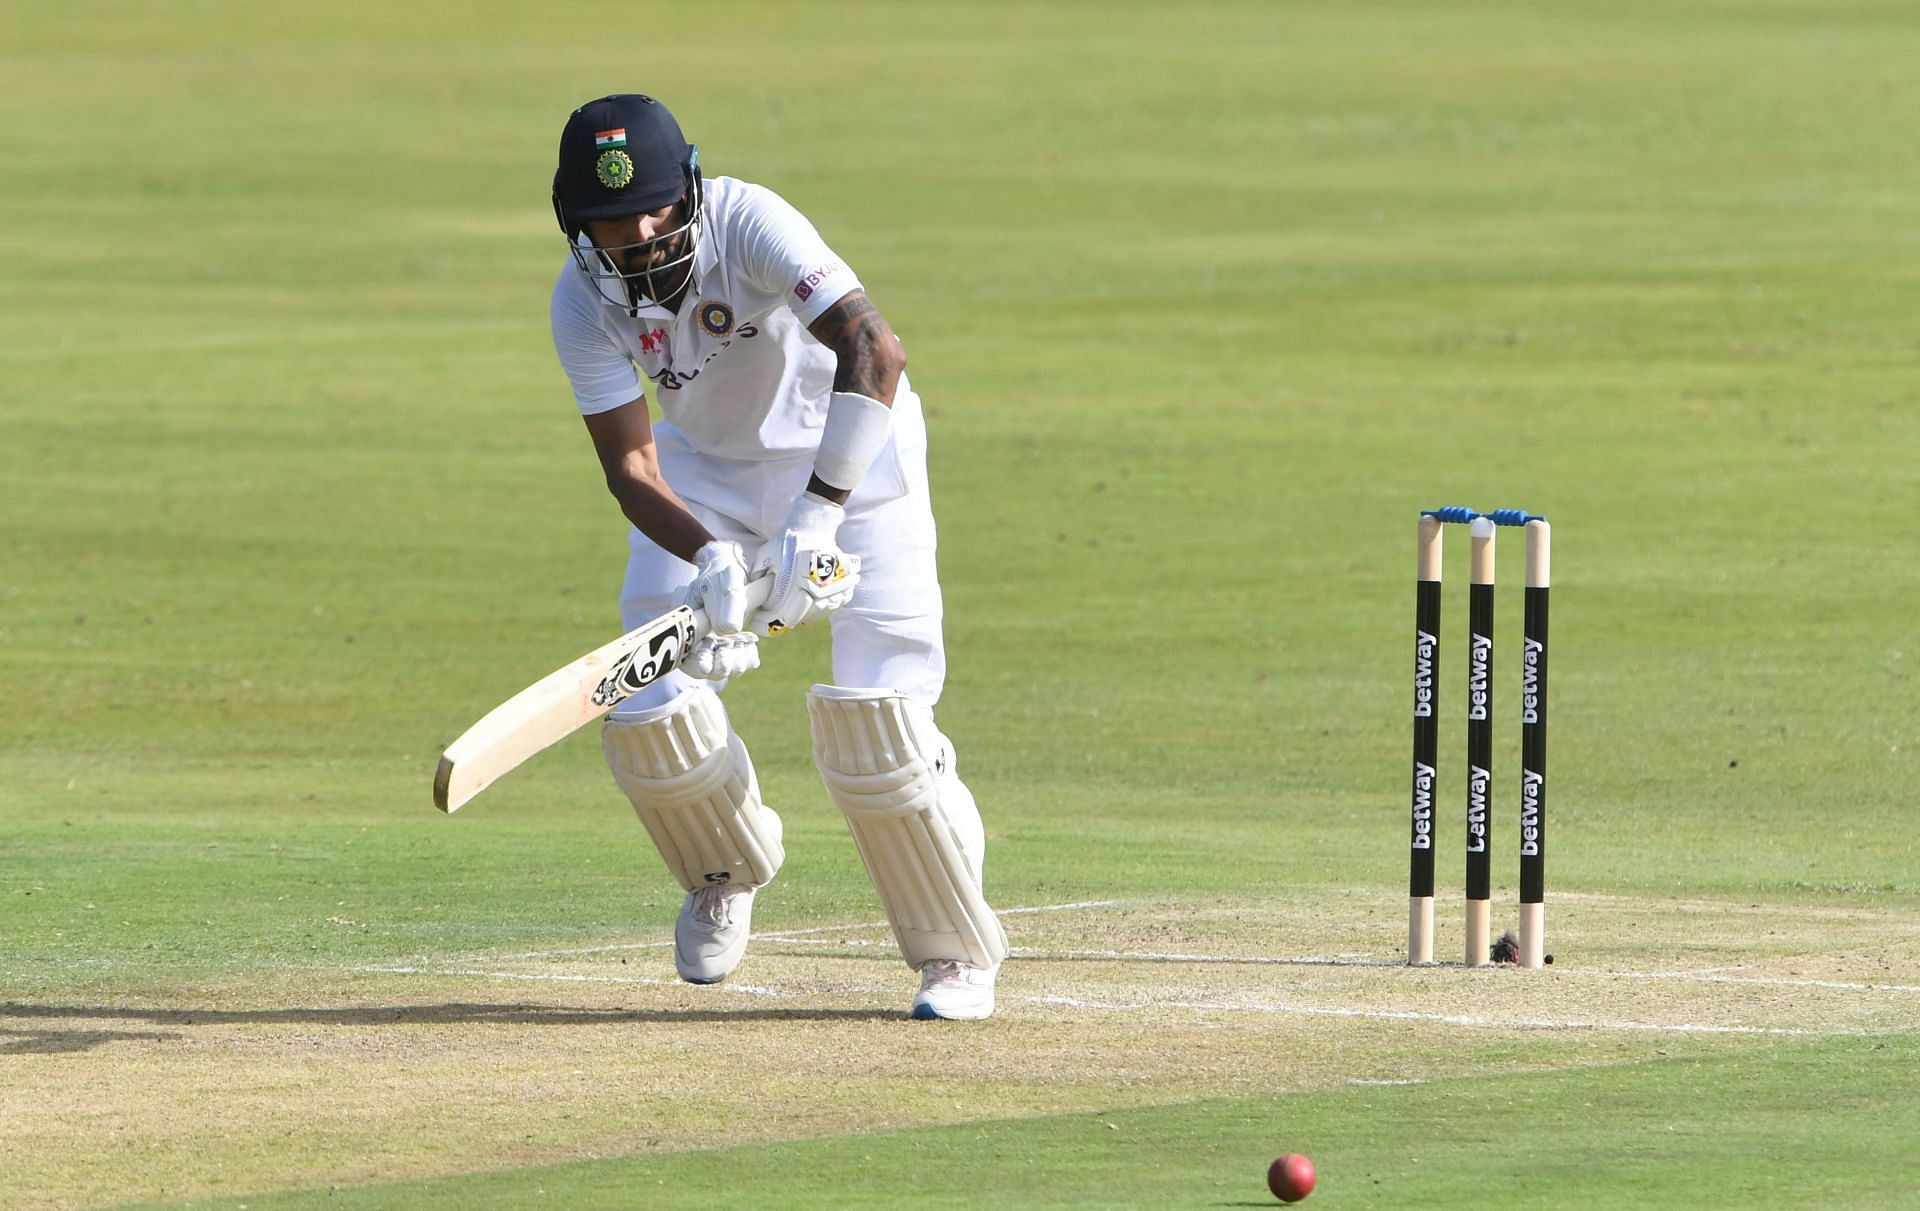 KL Rahul exhibited great patience during his innings